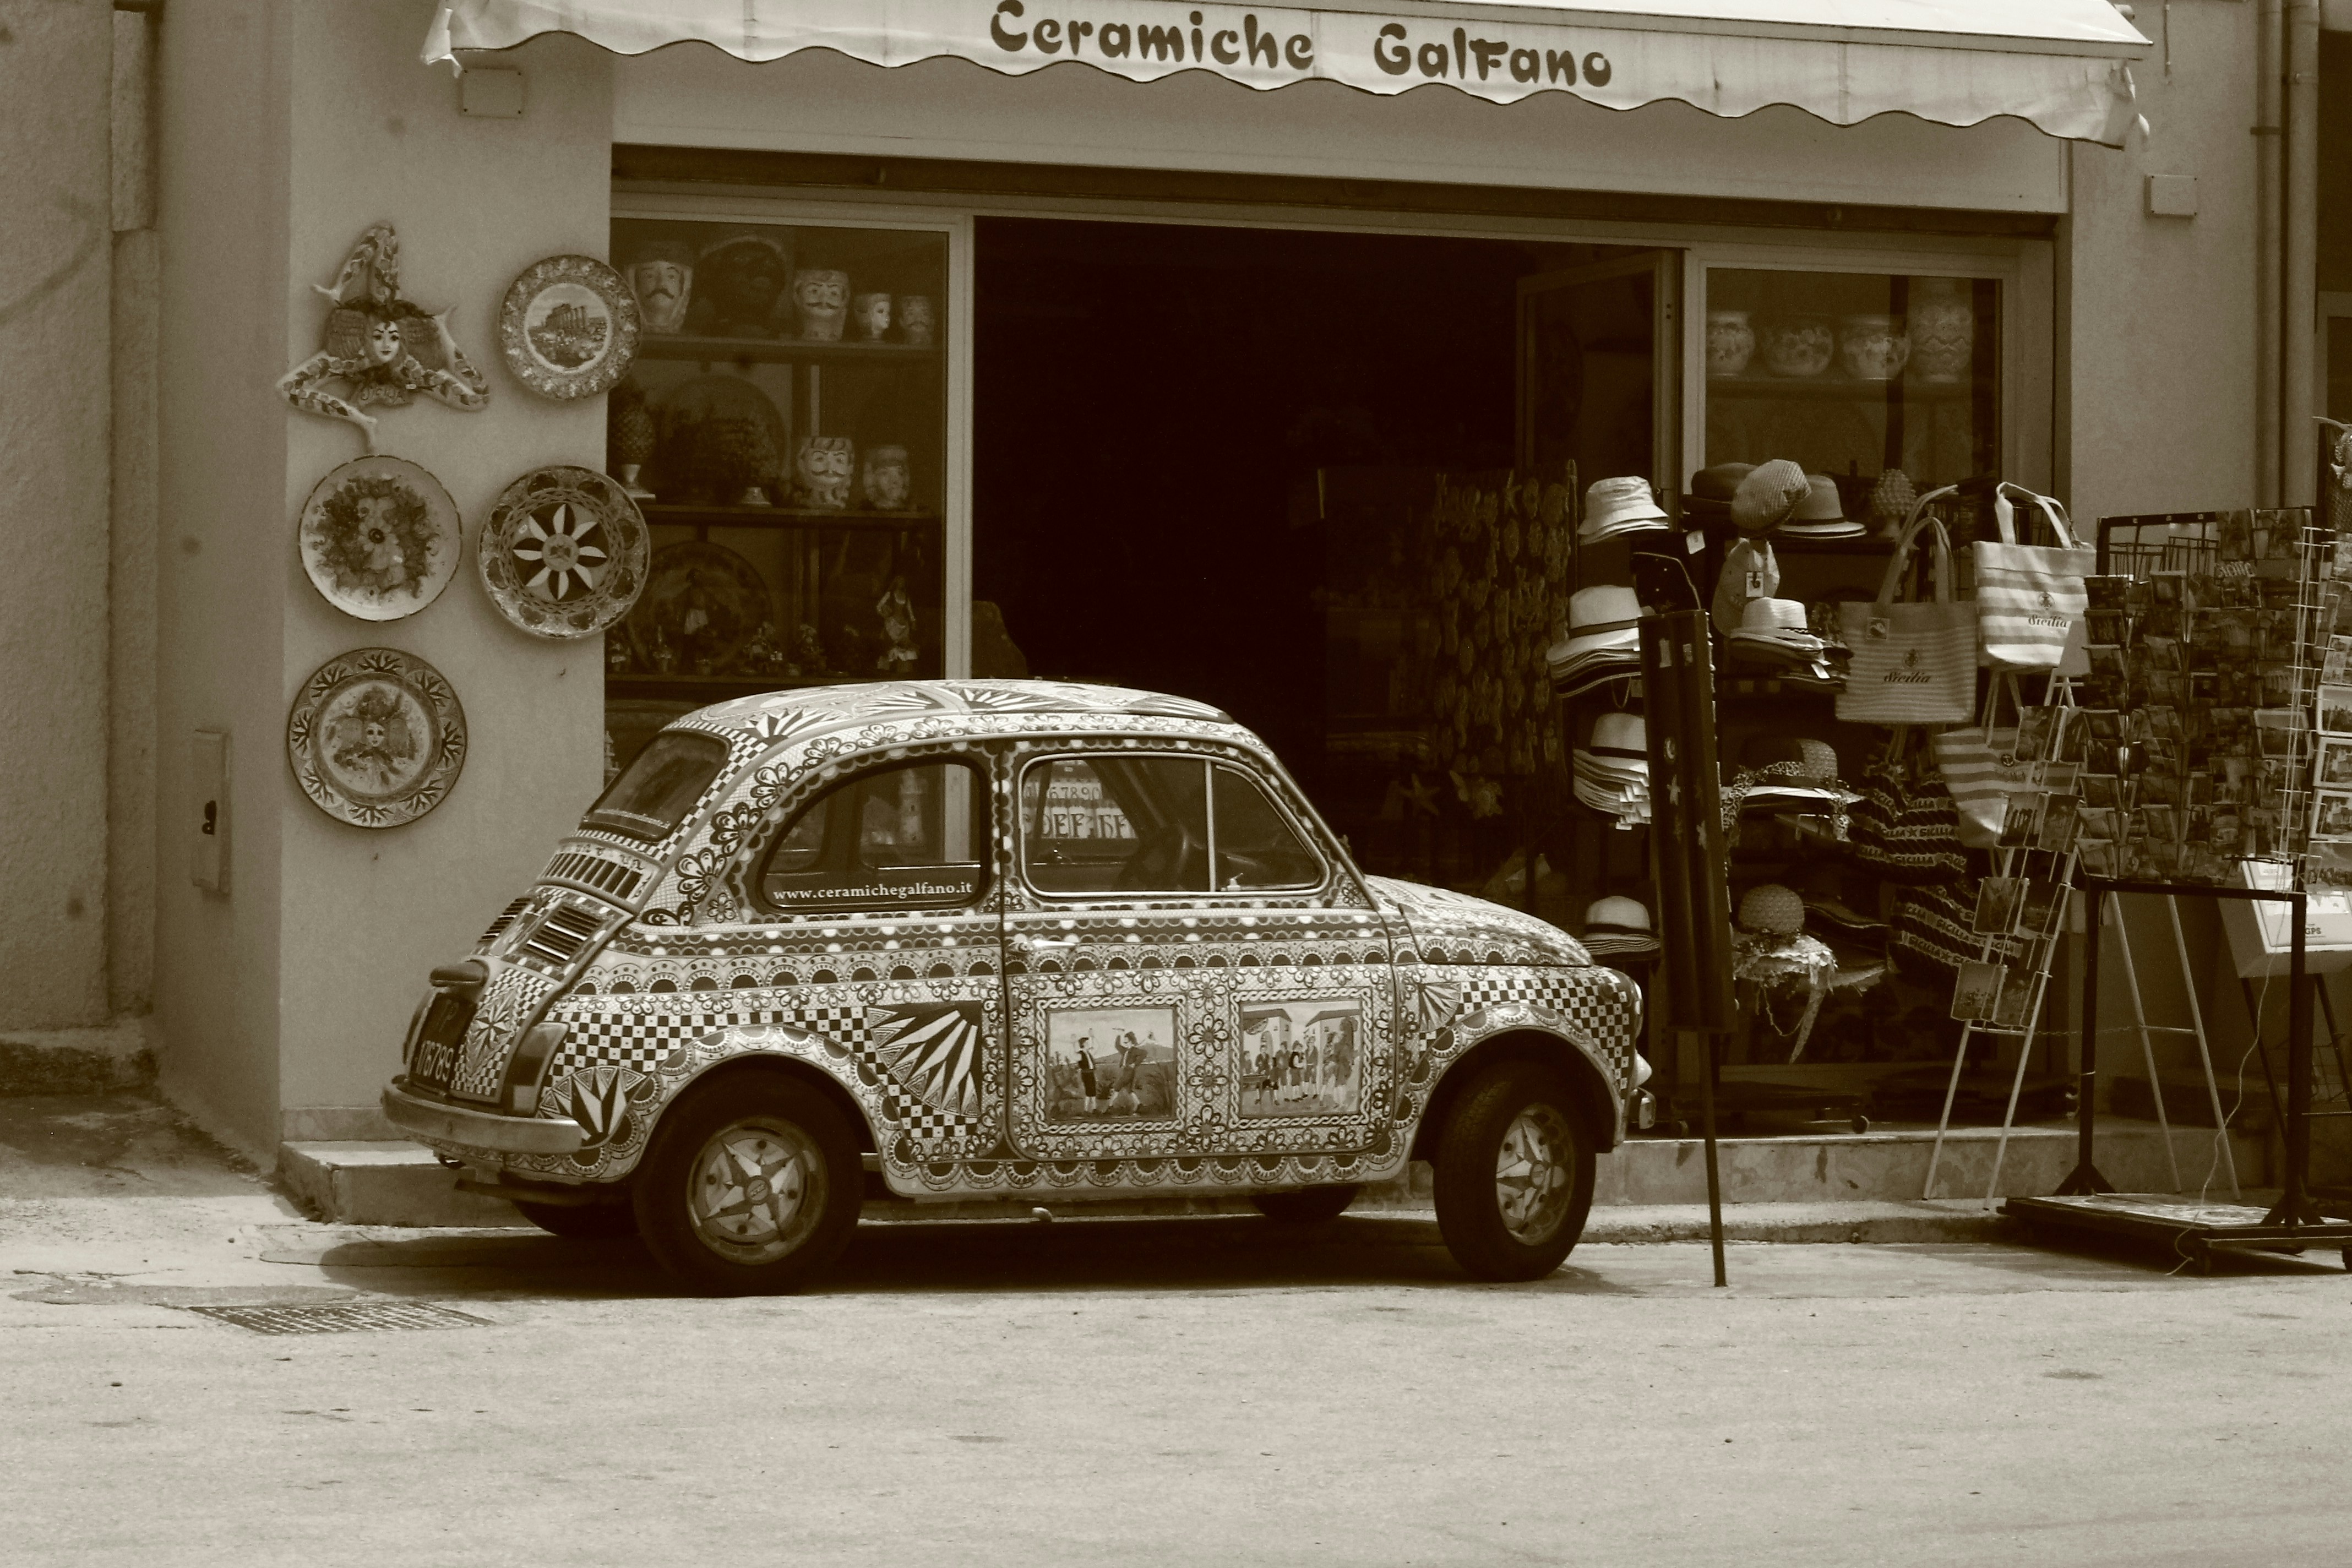 A decorative Fiat 500 resting outside of a souvenir store in the historic coastal town of Selinunte, on the Italian island of Sicily.